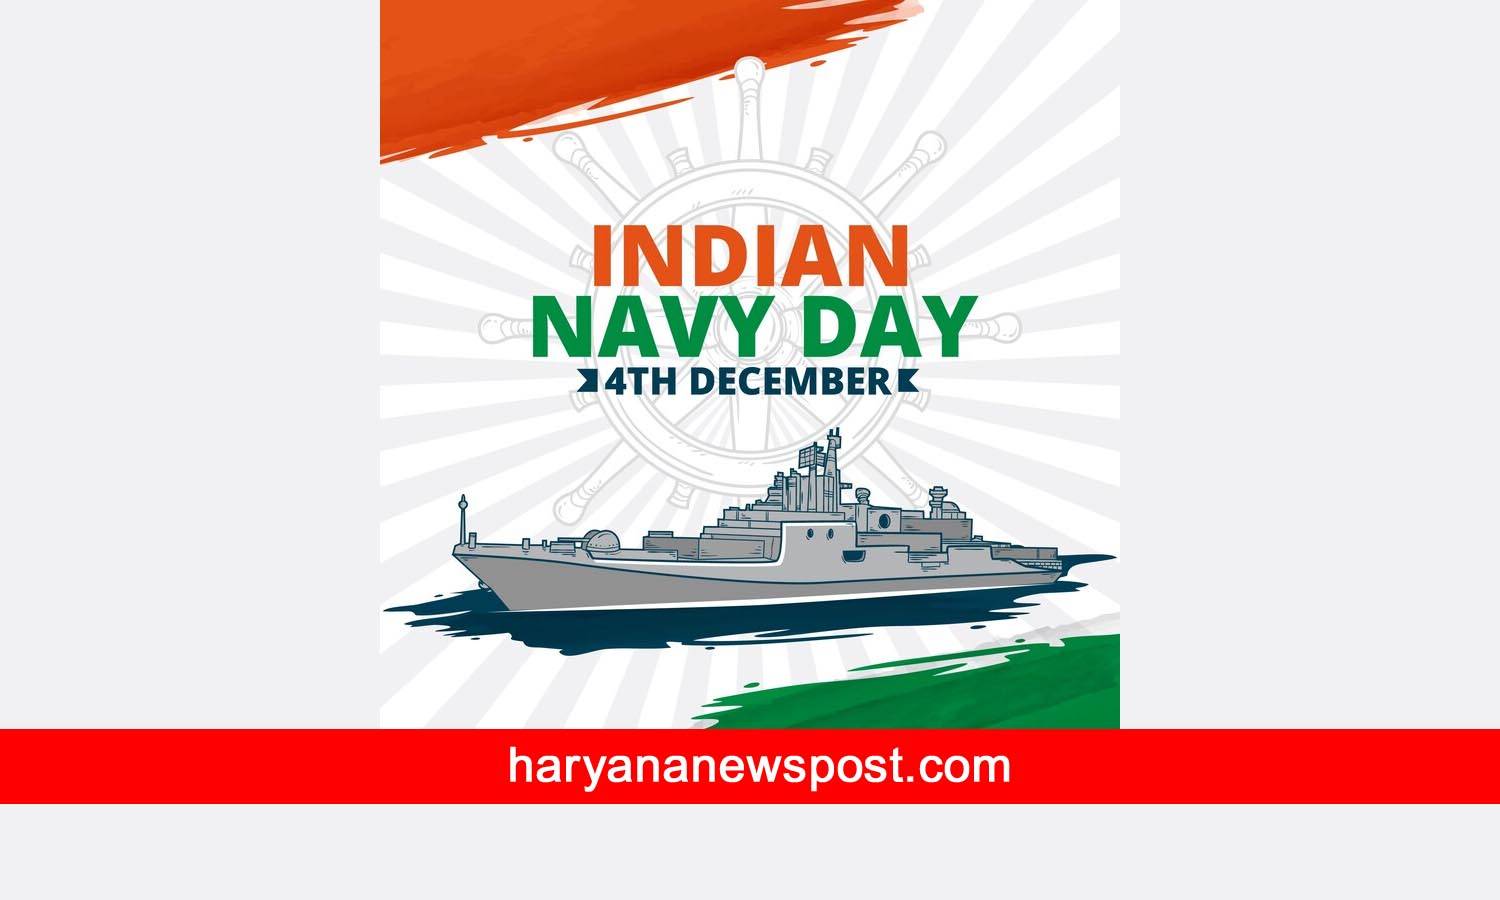 Happy Indian Navy Day wishes